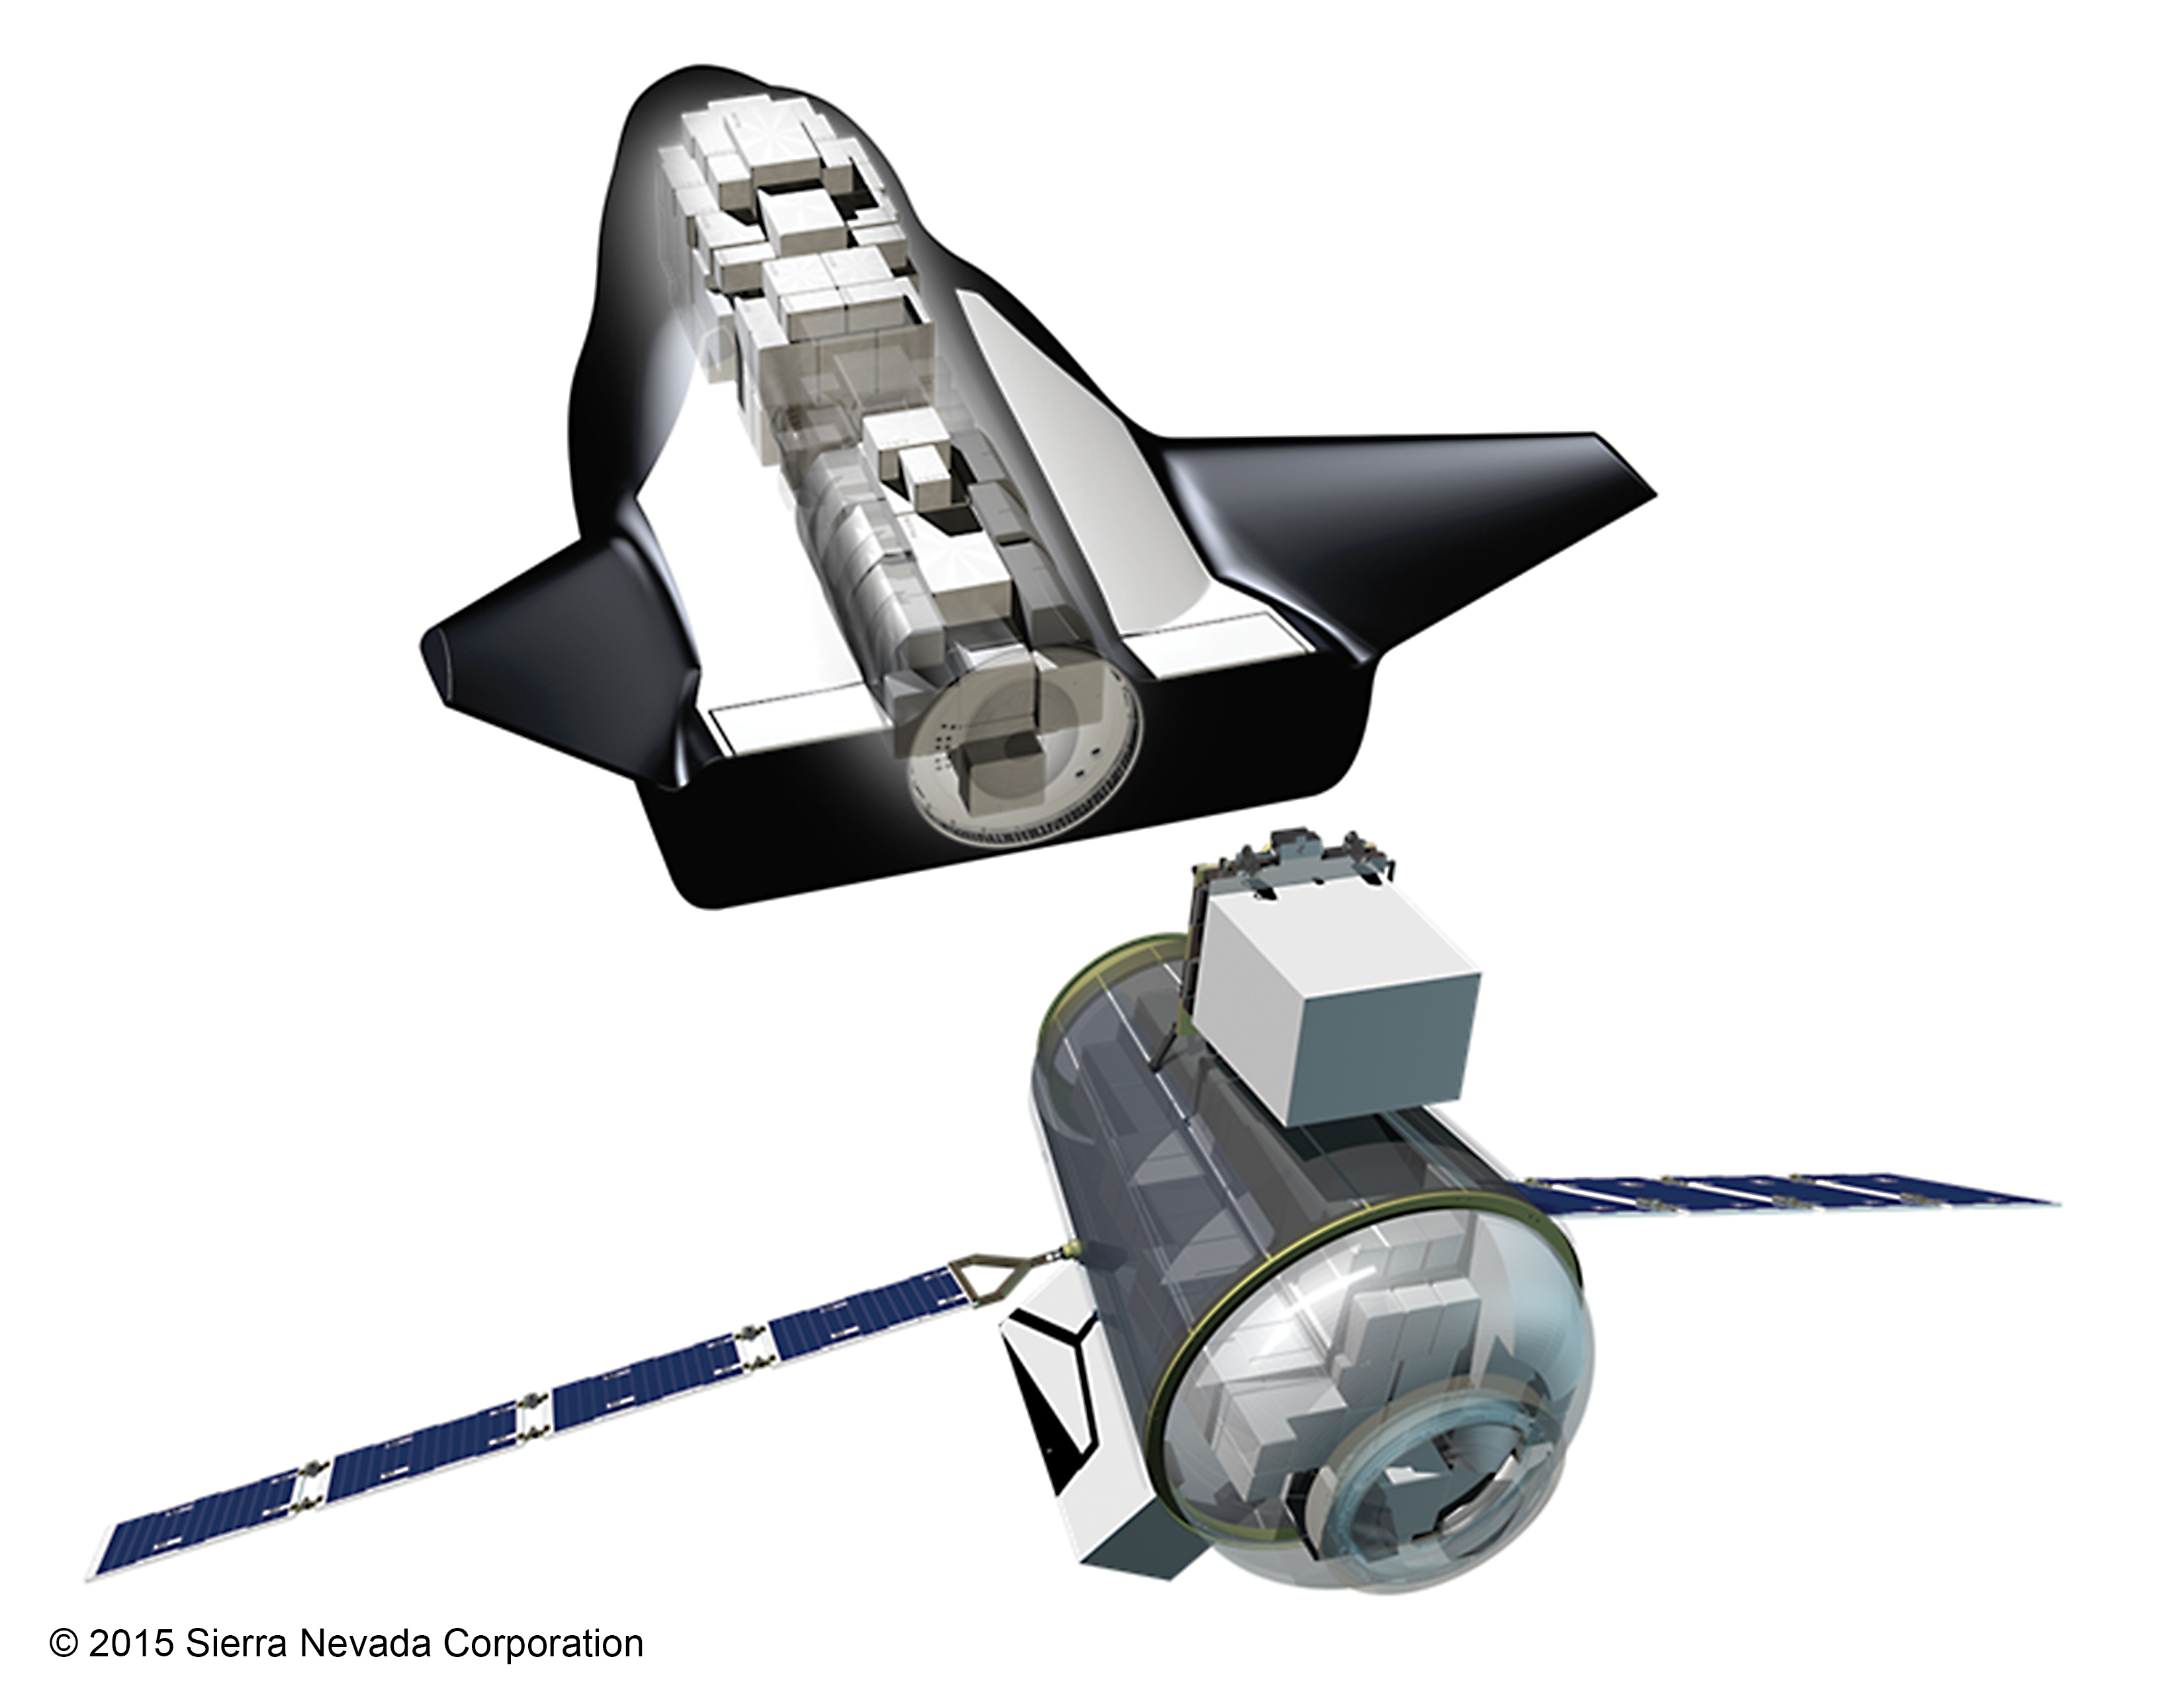 Unmanned version of SNC Dream Chaser space plan is comprised of two components, the vehicle and a cargo module with unpressurized and pressurized sections. Credit: Sierra Nevada Corporation